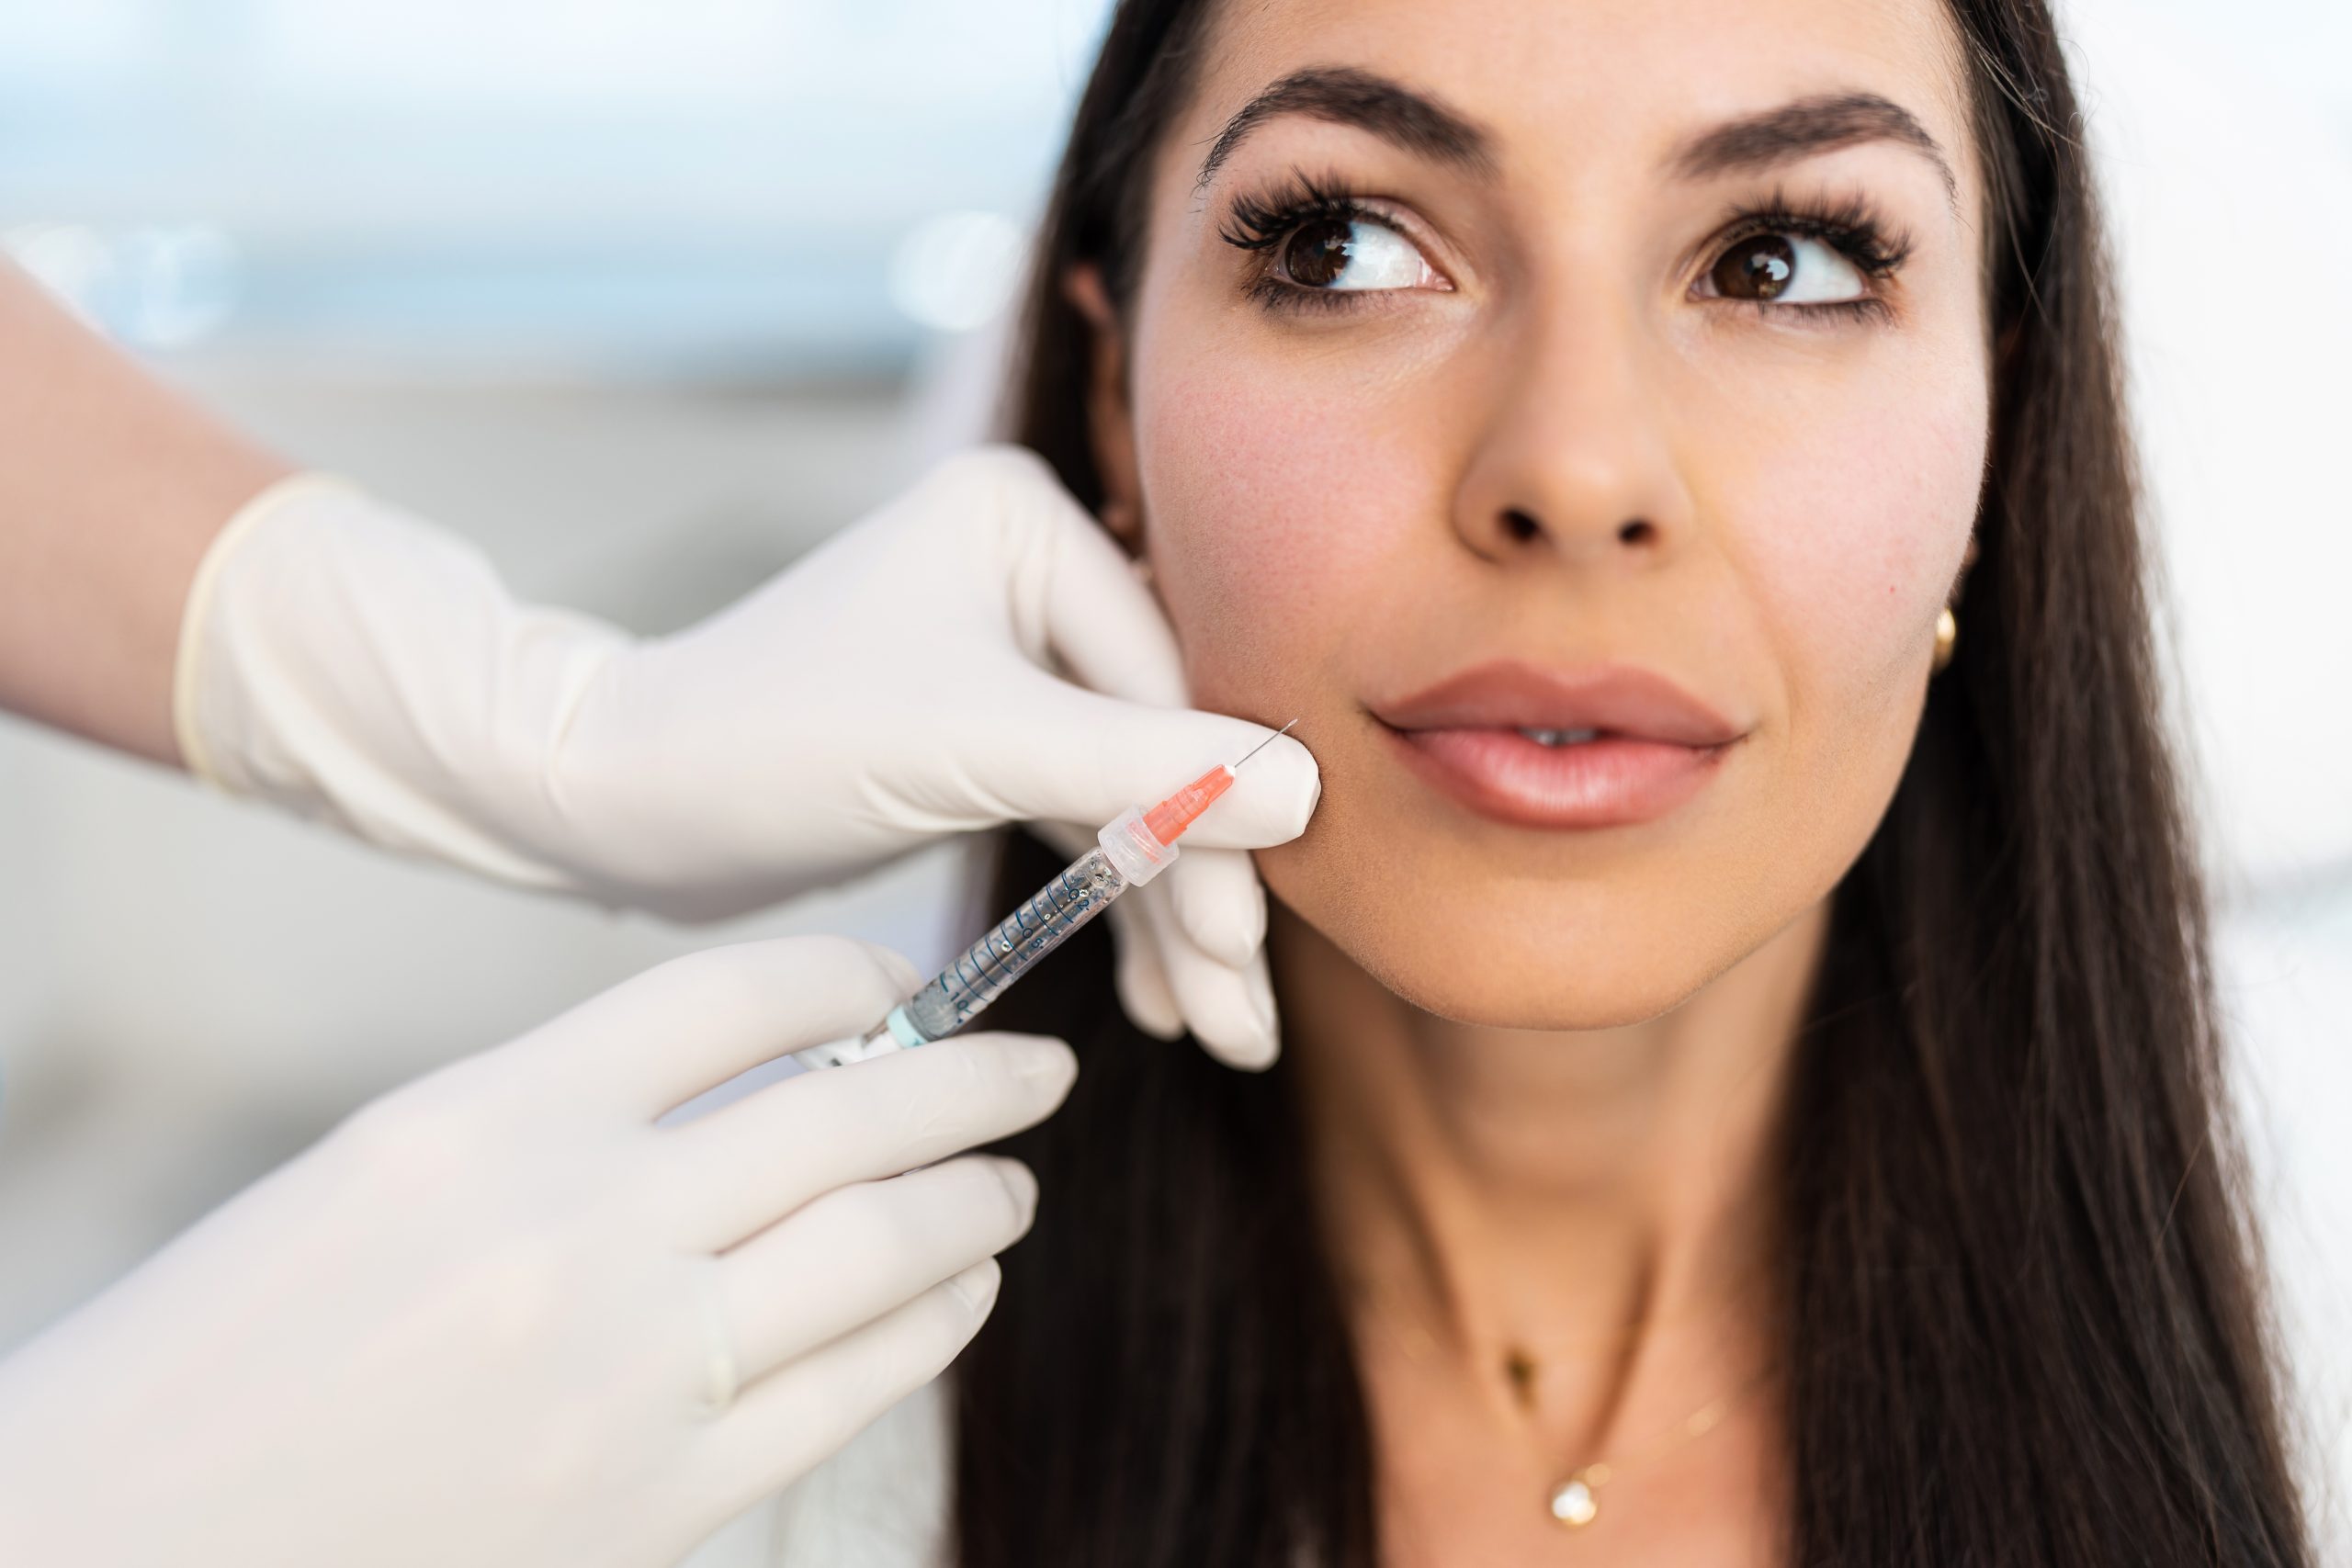 Does the idea of needles make you feel a bit squeamish? Have a low pain threshold? Then you’re likely curious to know if it hurts when you get lip filler in DC.